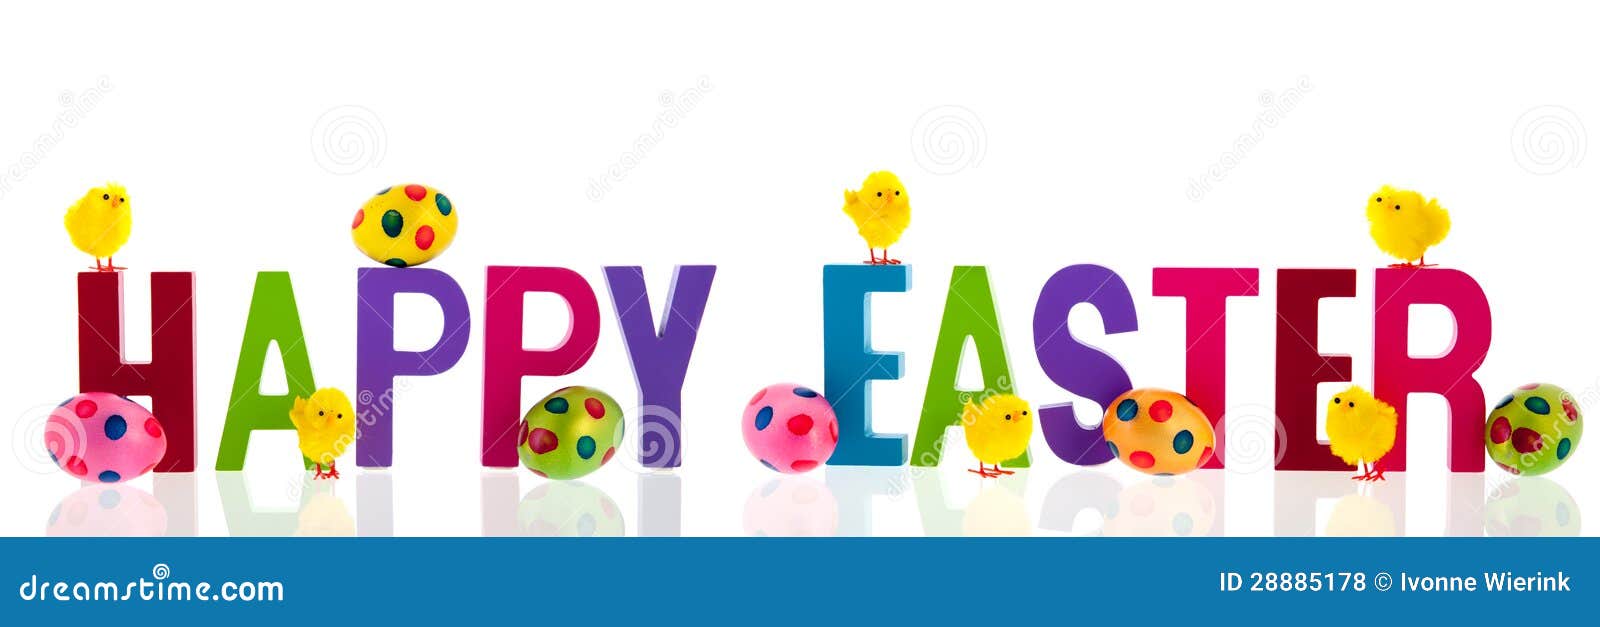 happy easter with eggs and chicks